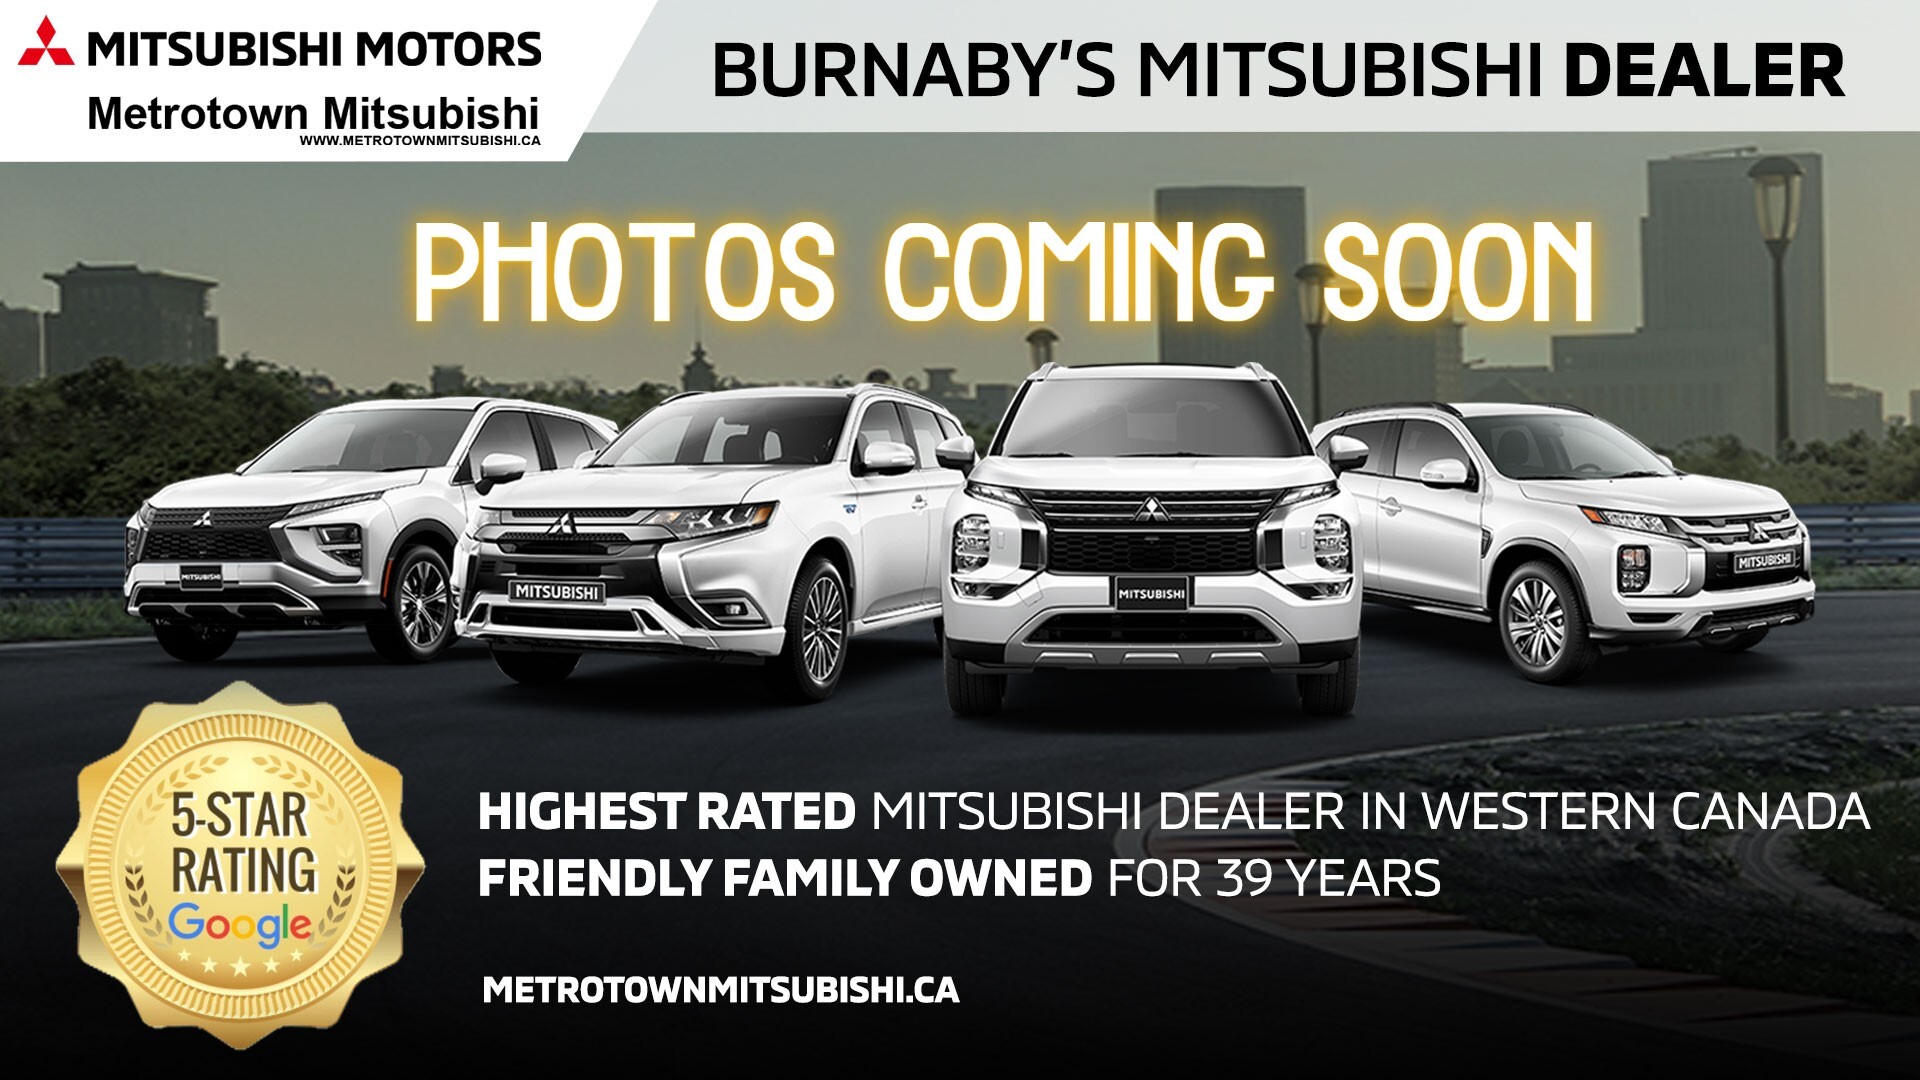 2022 Mitsubishi Outlander GT S-AWC - 0% Financing Available* - Manager Demo